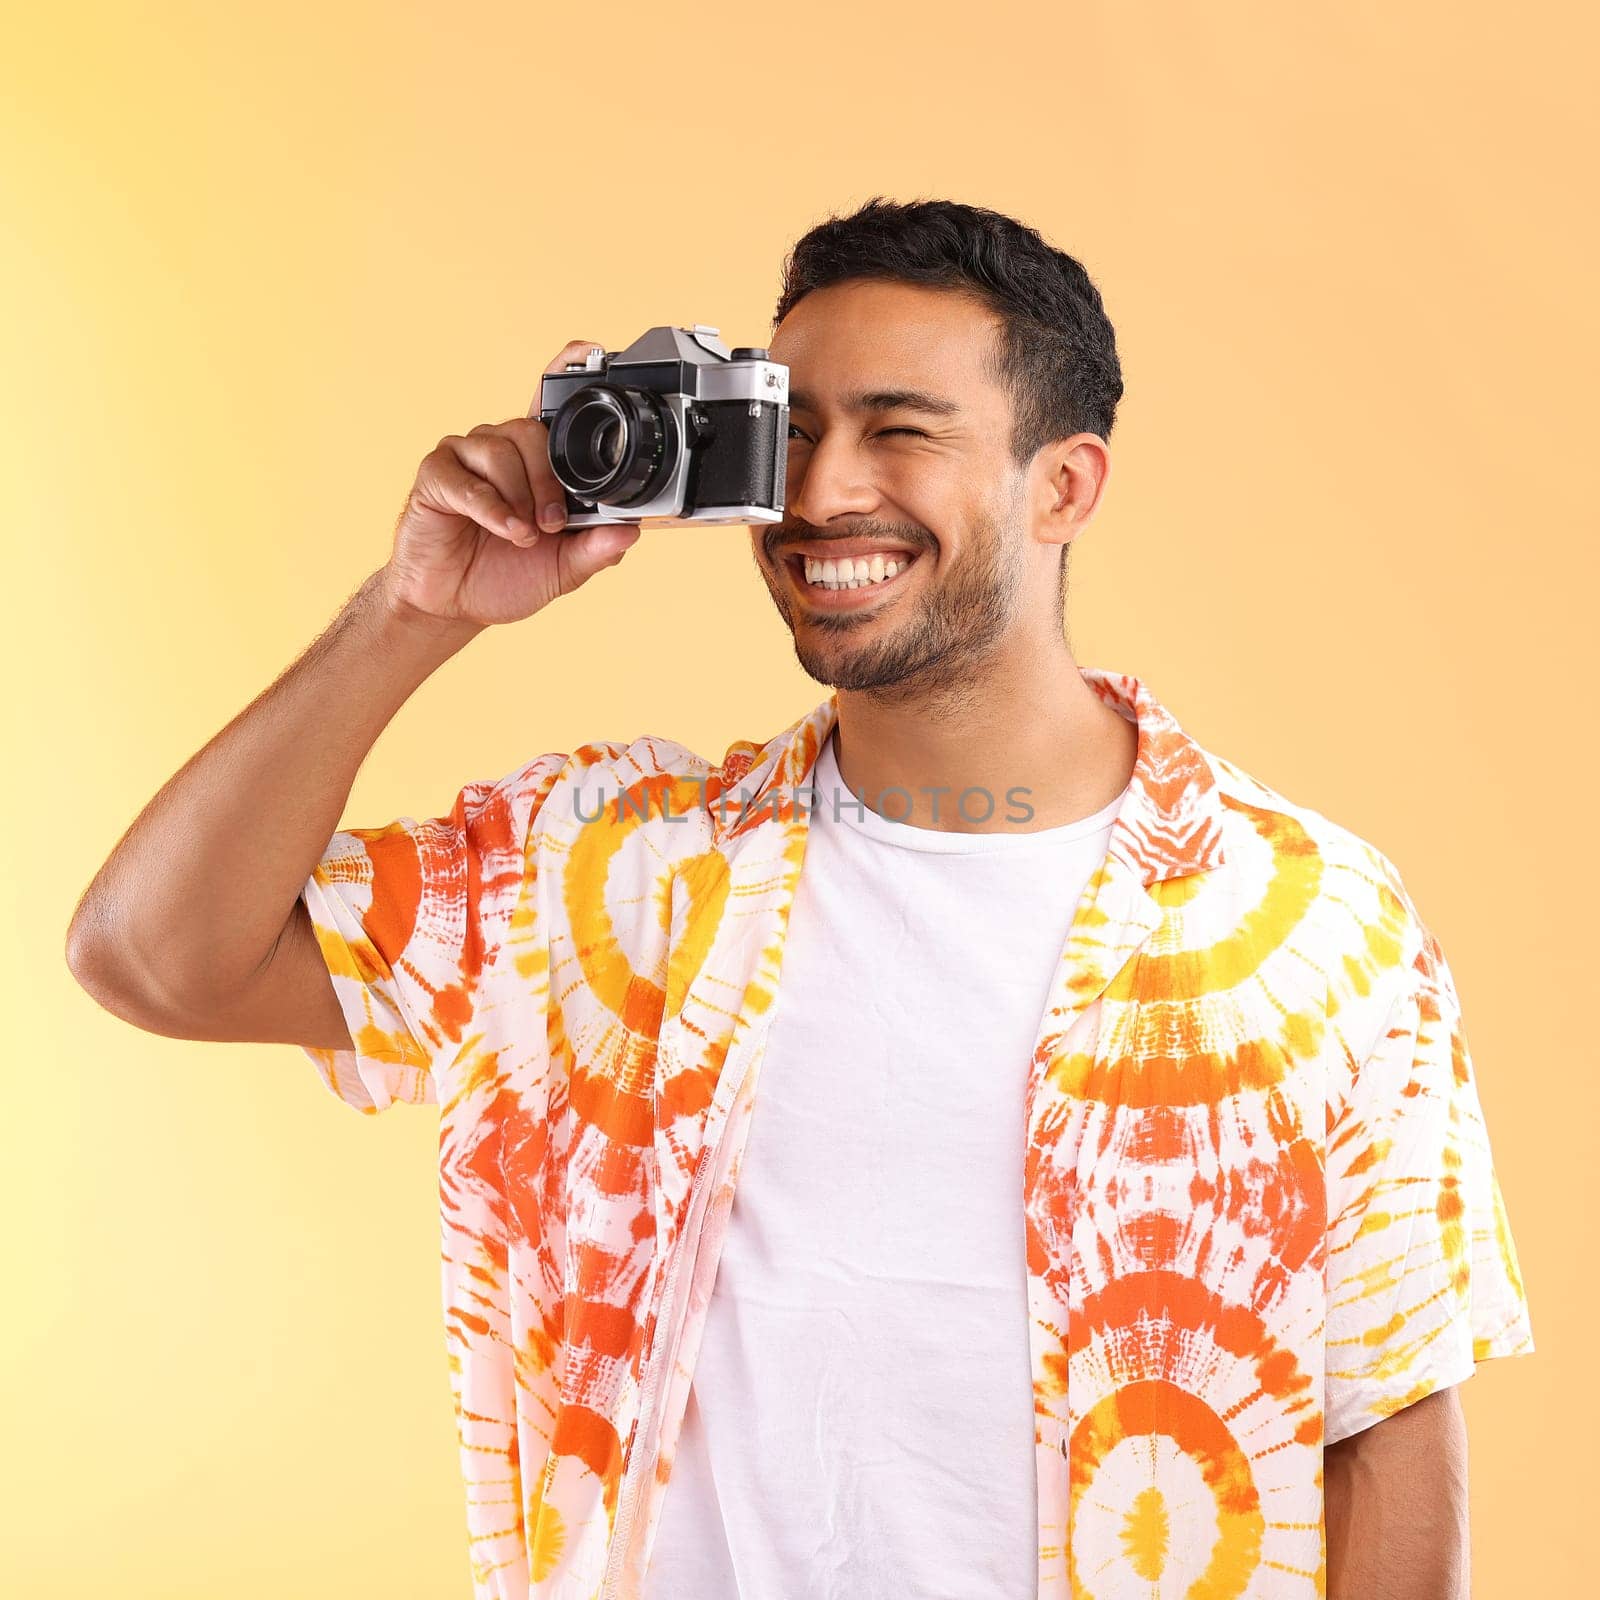 Photographer, camera and man taking pictures in studio isolated on an orange background. Travel, vacation and male model holding camcorder technology for taking photo for happy memory on holiday